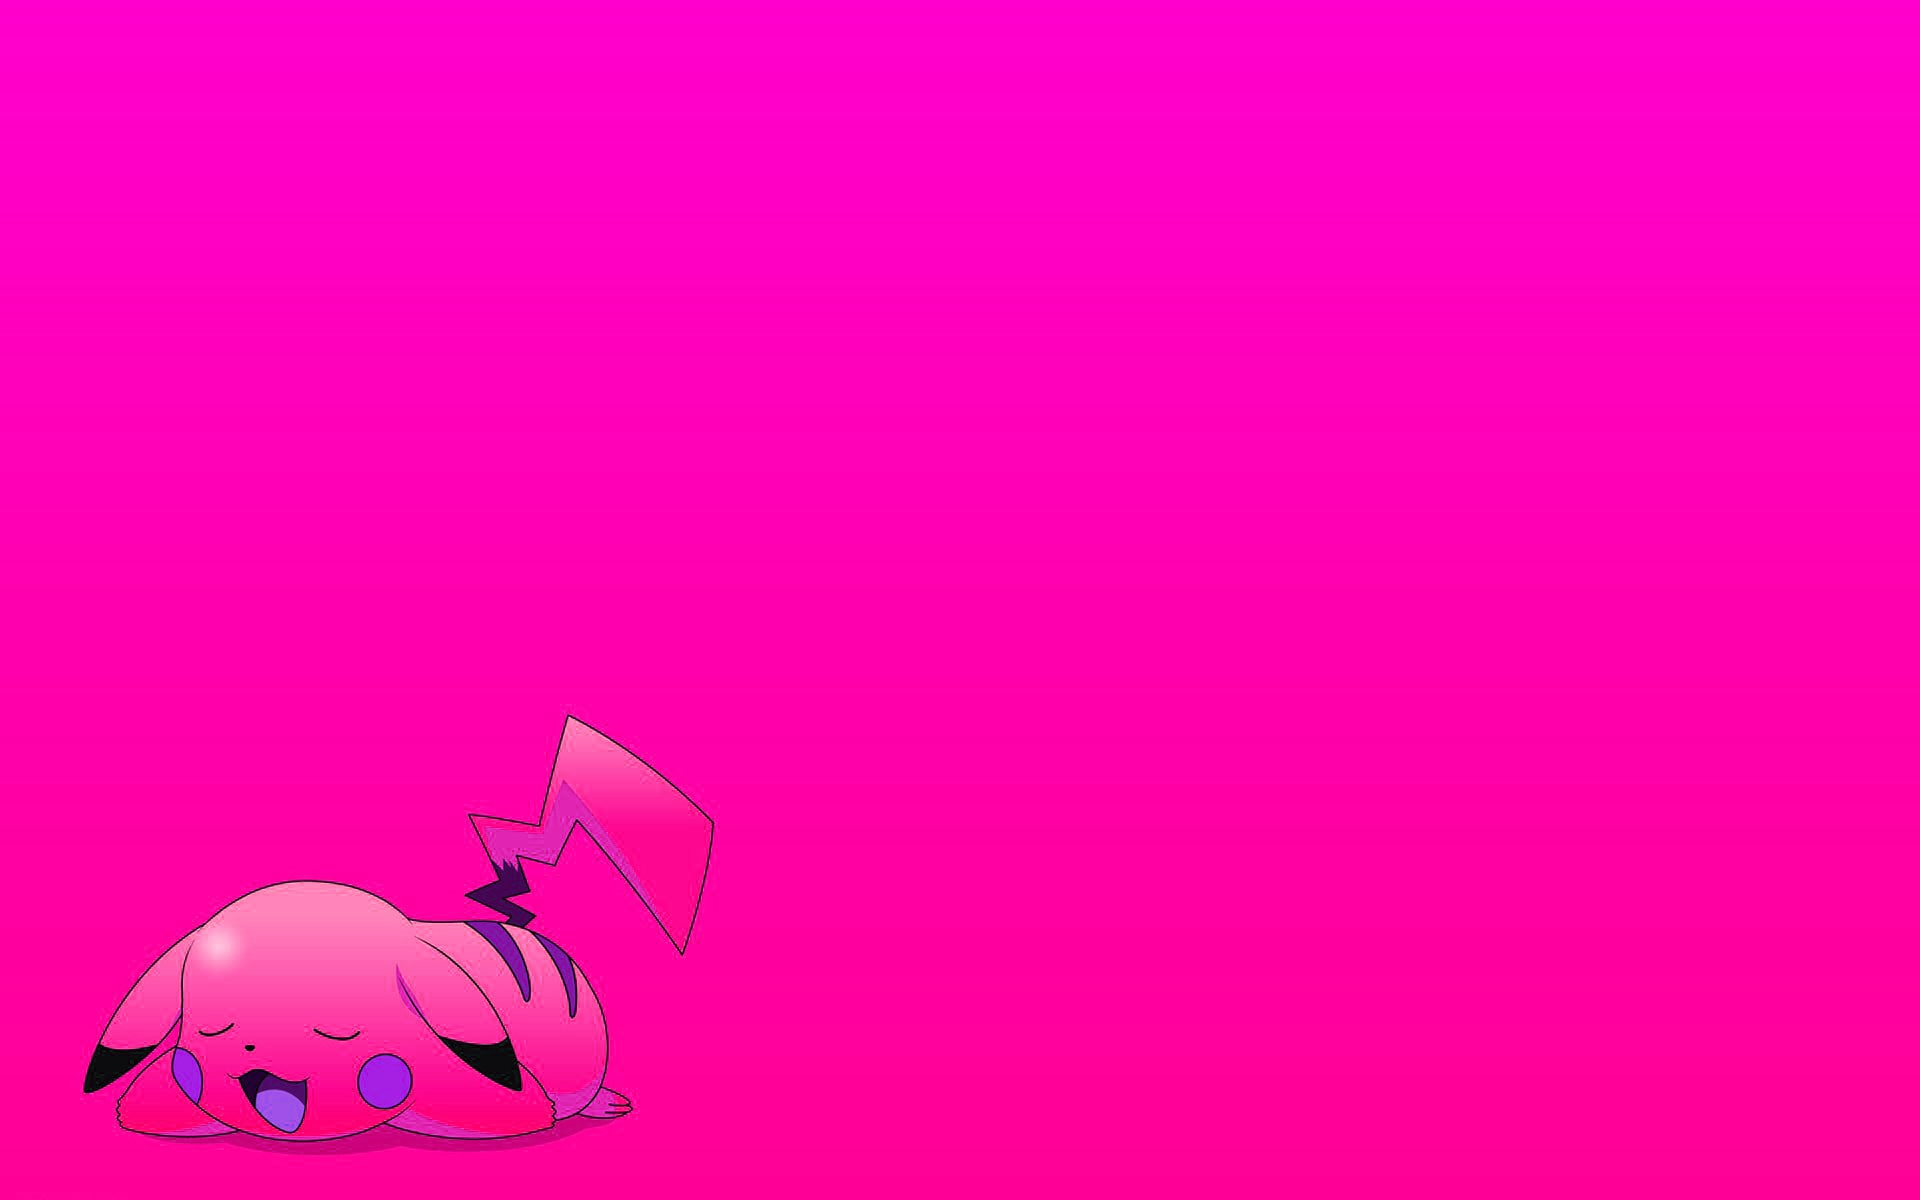 A pink sleeping Ditto with a pink background - Pikachu